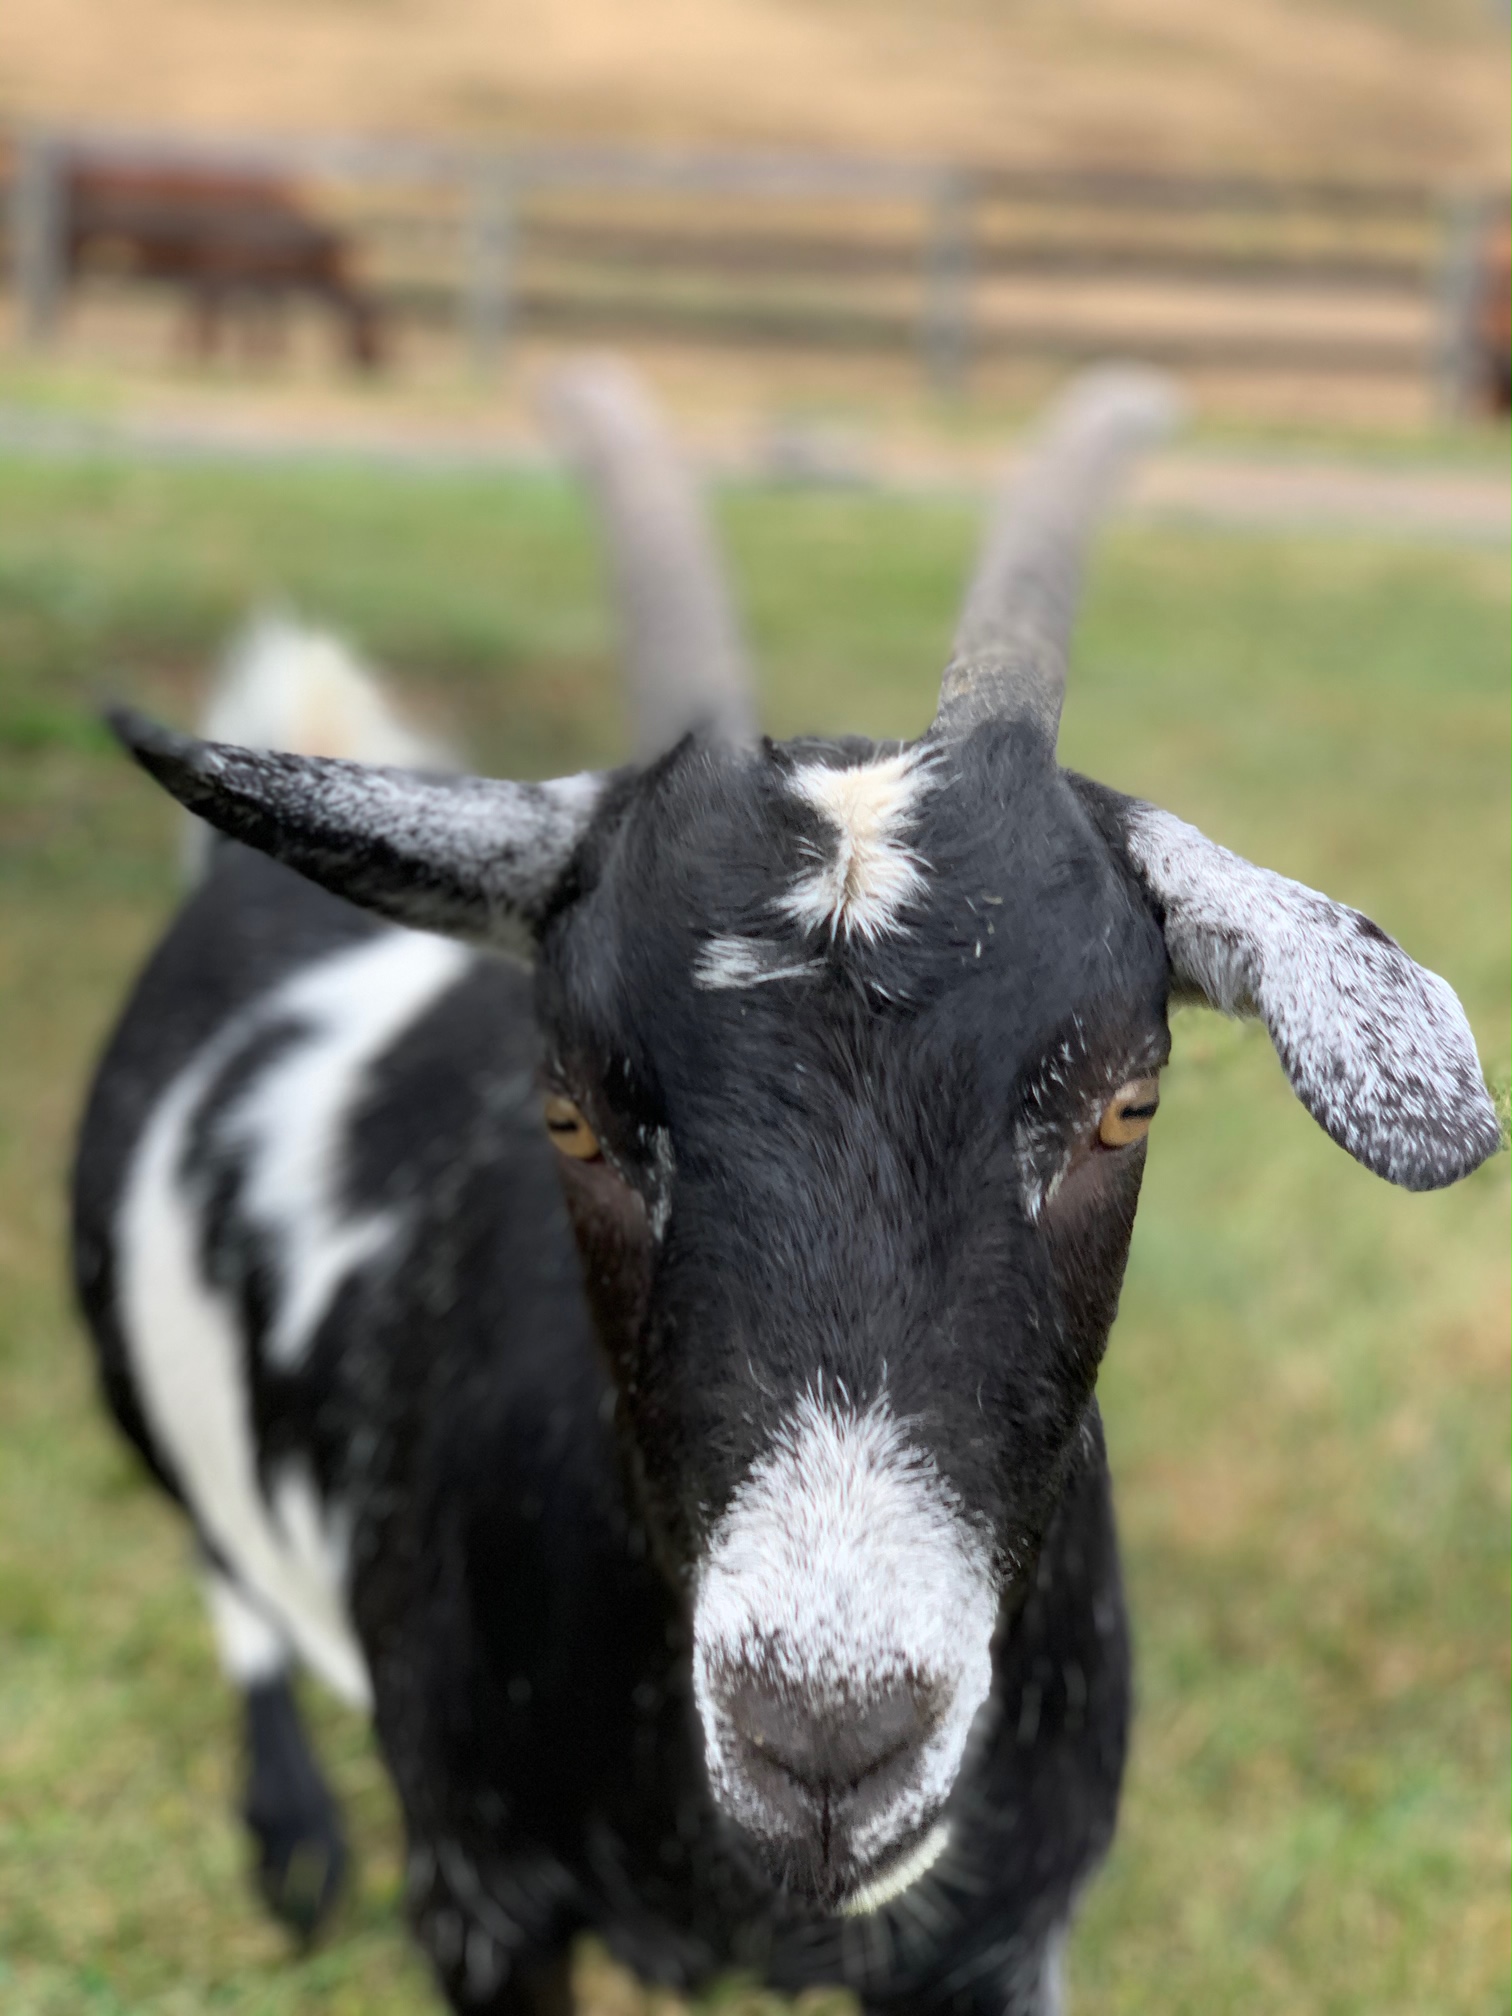 Cher, our silly goat that thinks she's a dog, playing on the farm.